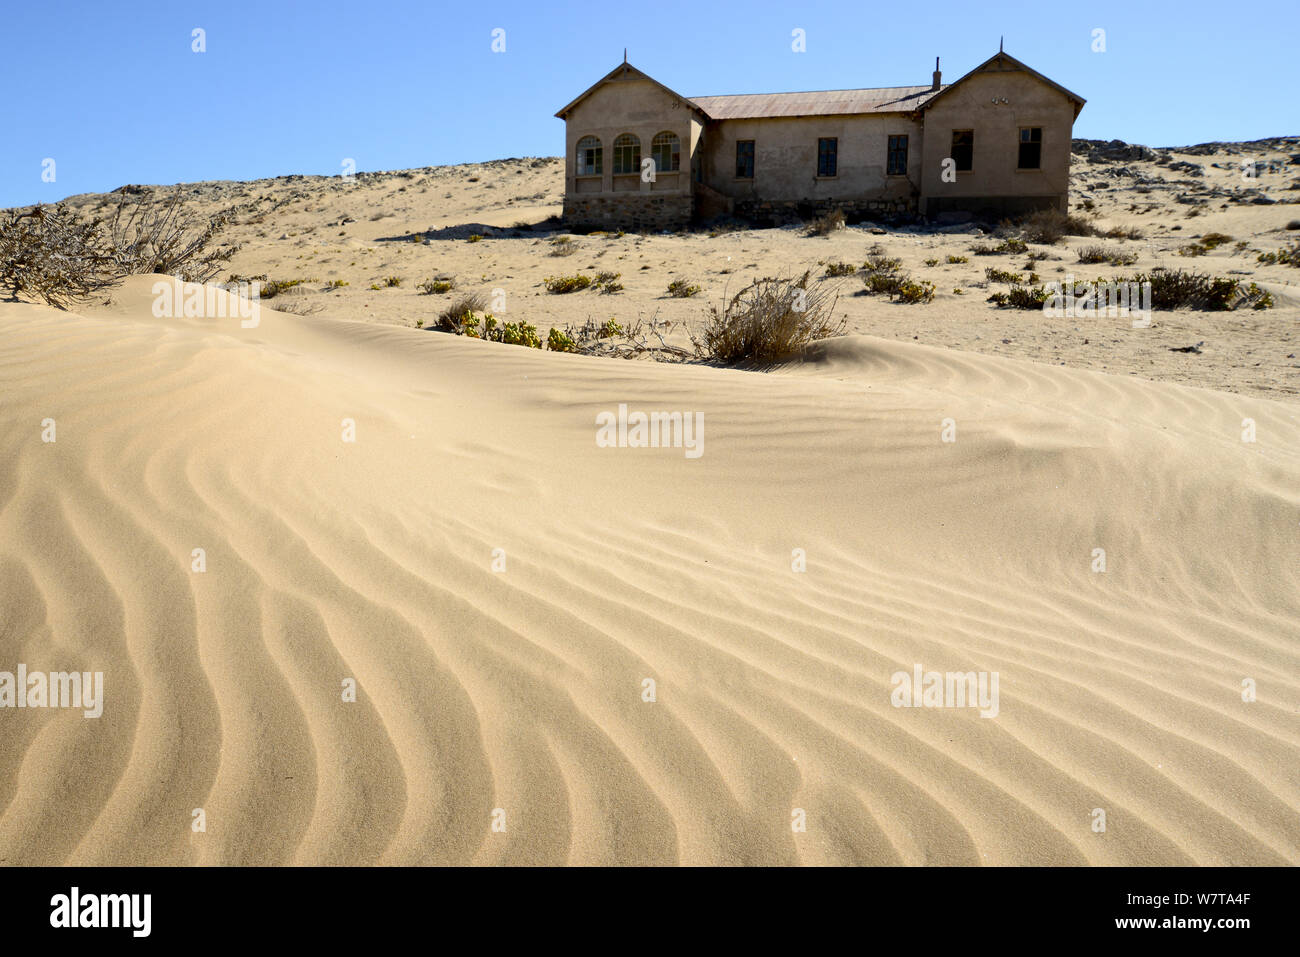 Abandoned house in sand dunes. Kolmanskop Ghost Town, an old diamond-mining town where shifting sand dunes have encroached abandoned houses, Namib Desert Namibia, October 2013. Stock Photo